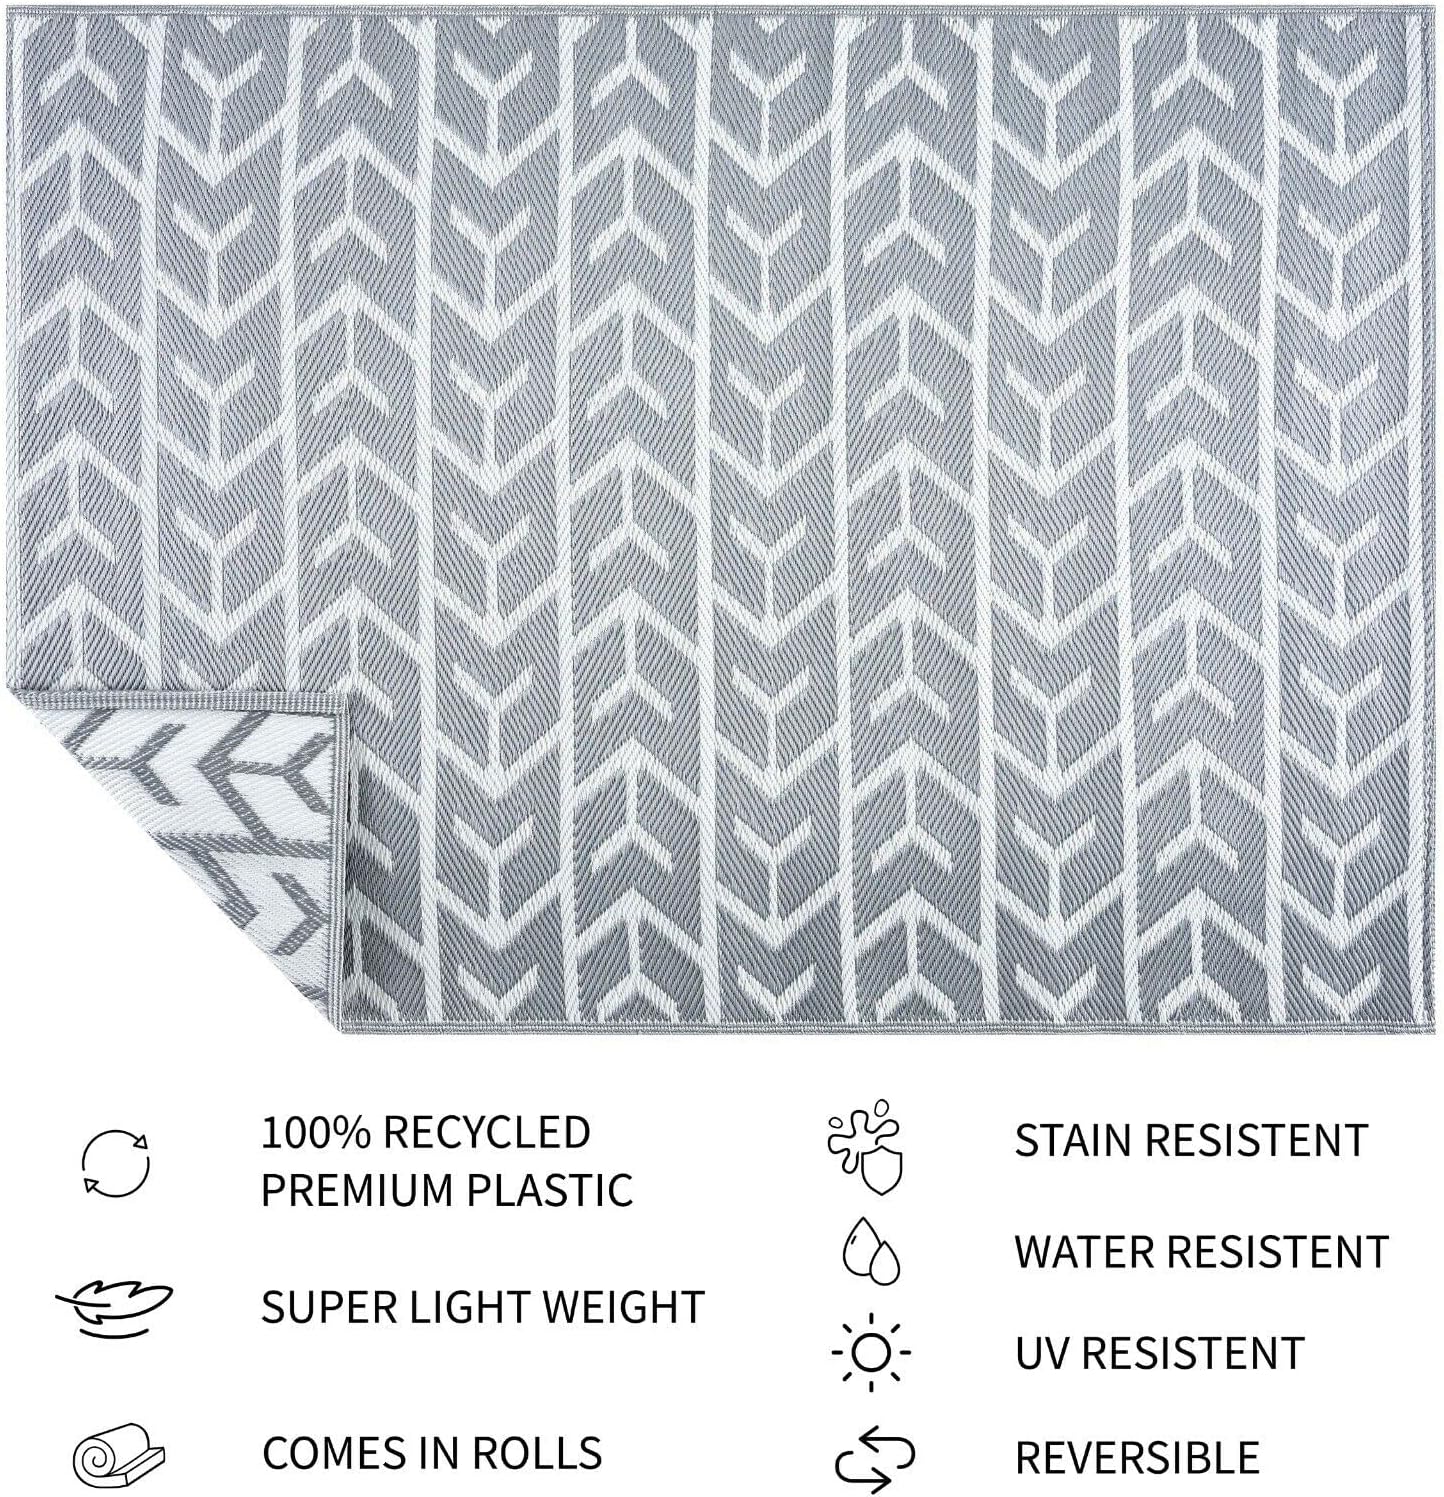 Playa Outdoor Rug - Crease-Free Recycled Plastic Floor Mat for Patio, Camping, Beach, Balcony, Porch, Deck - Weather, Water, Stain, Lightweight, Fade and UV Resistant - Amsterdam- Gray & White